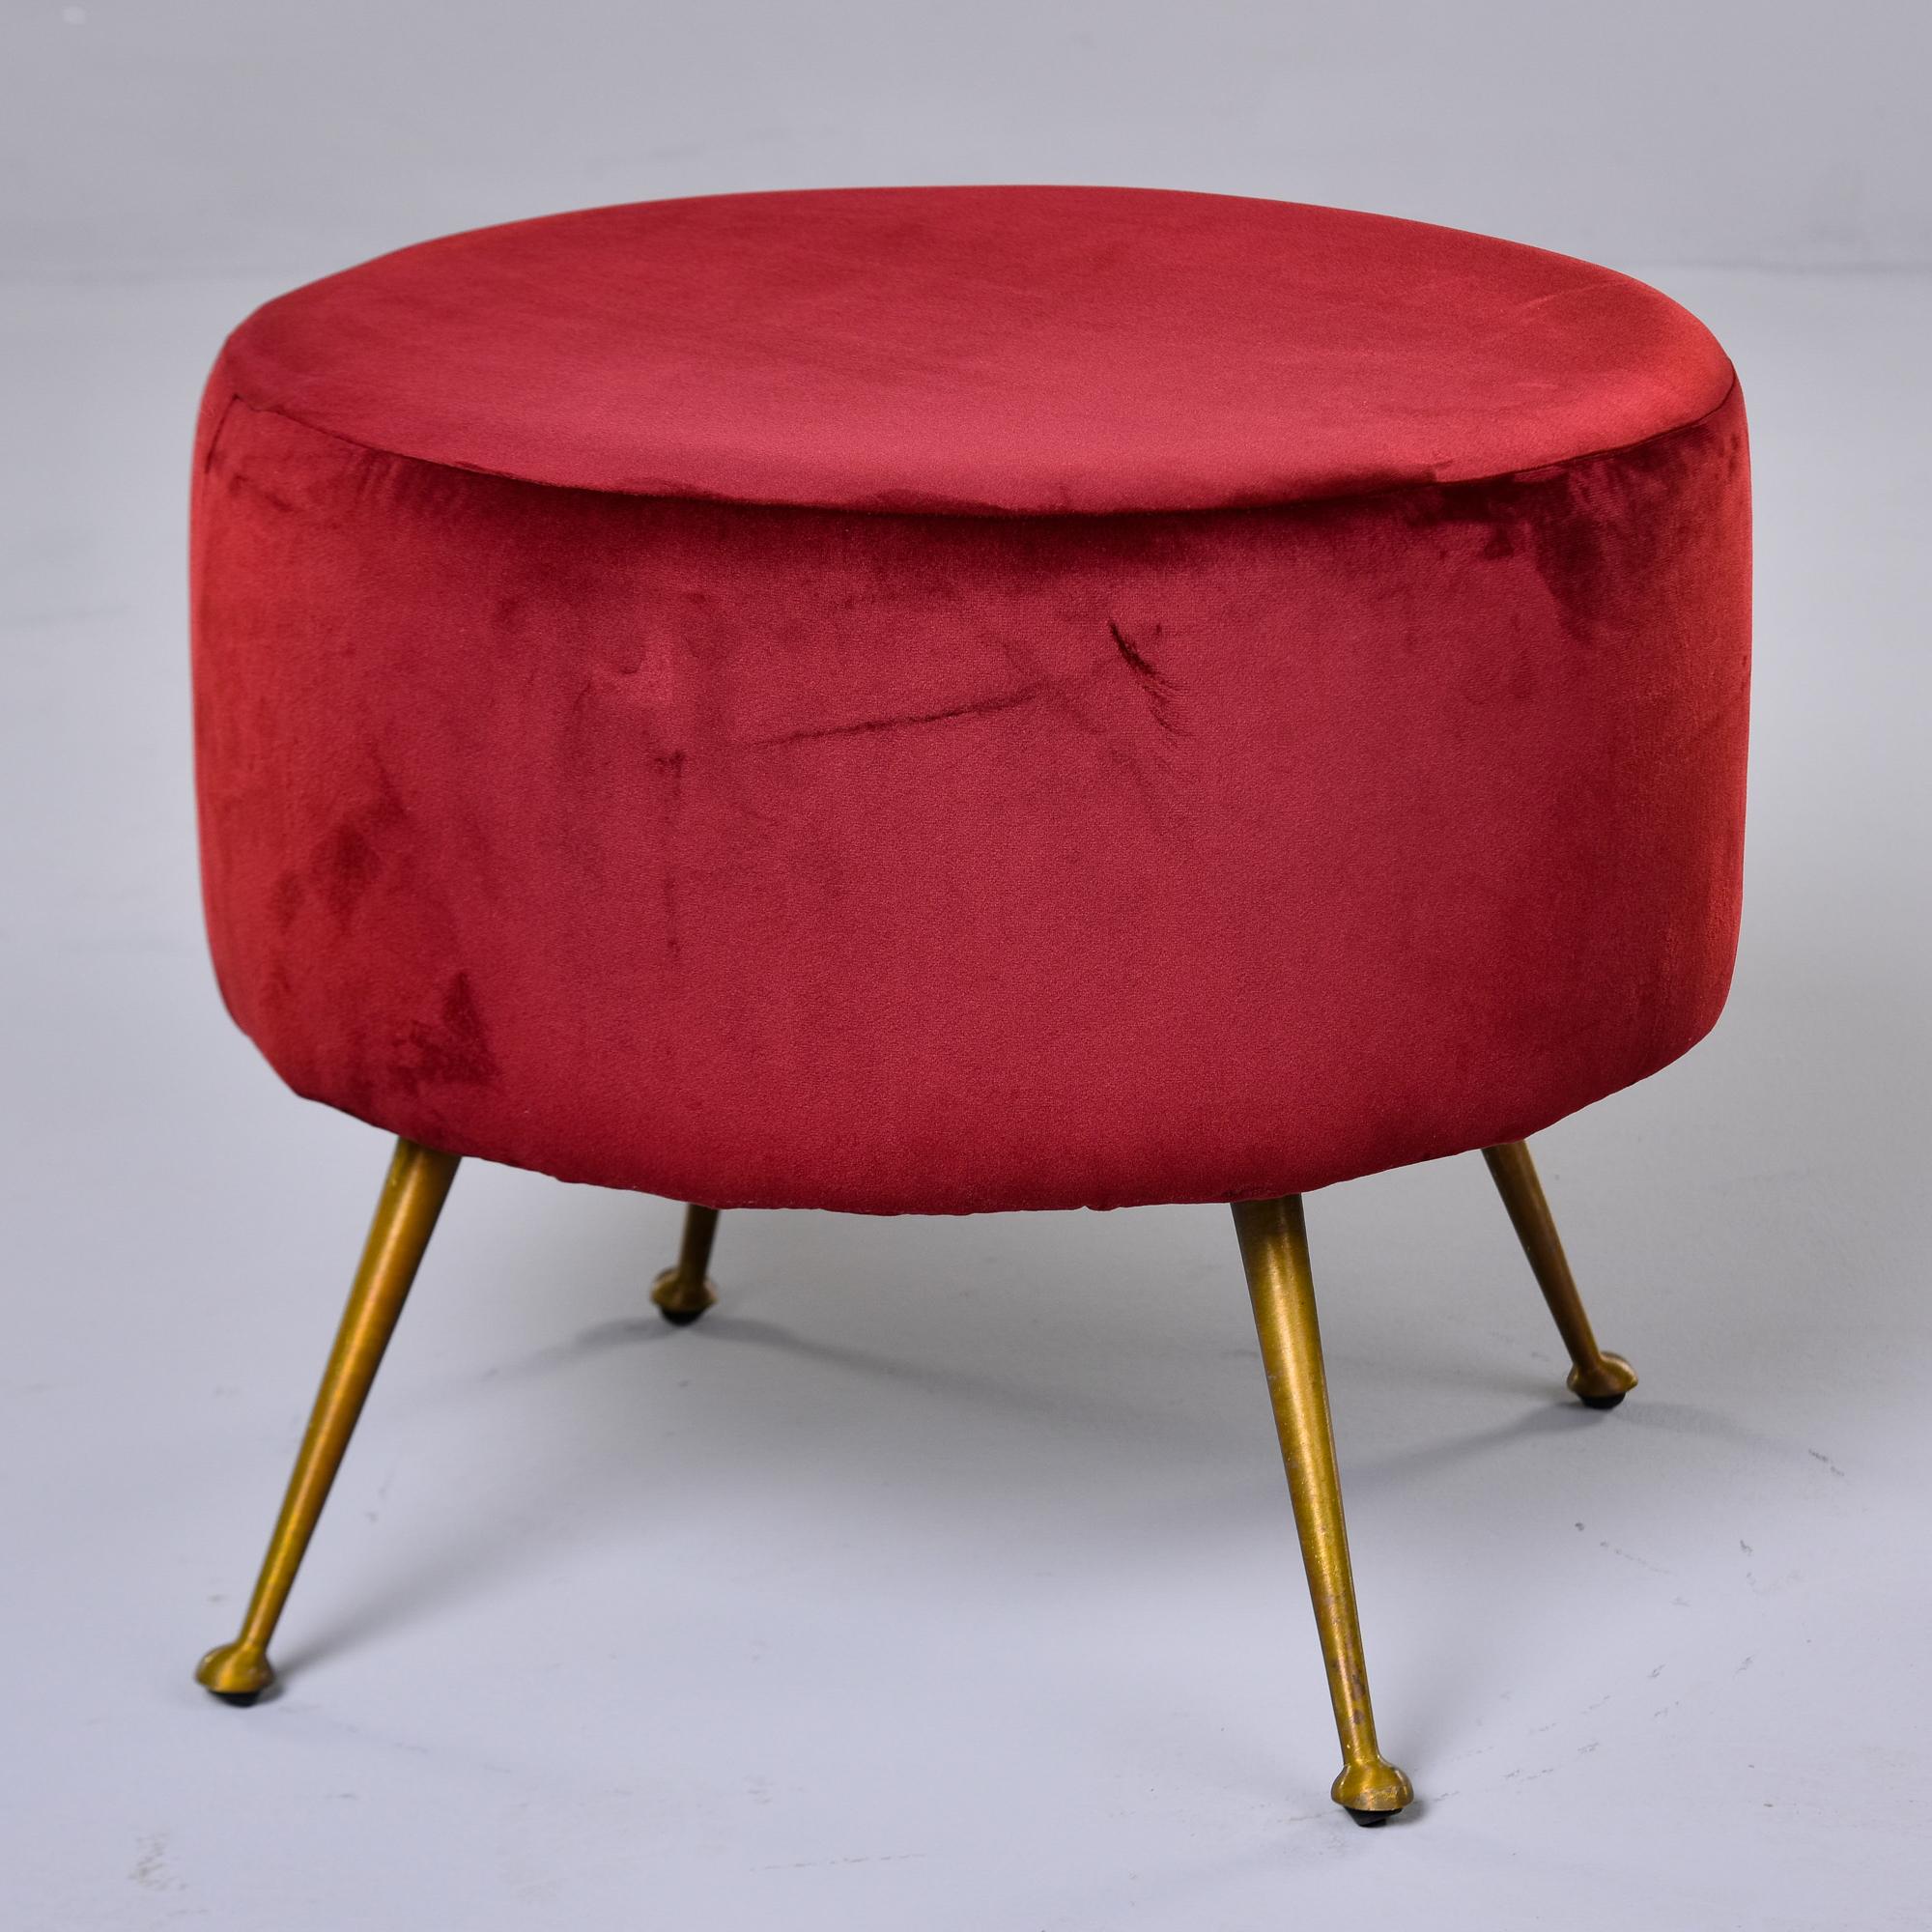 Mid-Century Modern Italian Midcentury Round Stool with Red Upholstery and Brass Legs For Sale